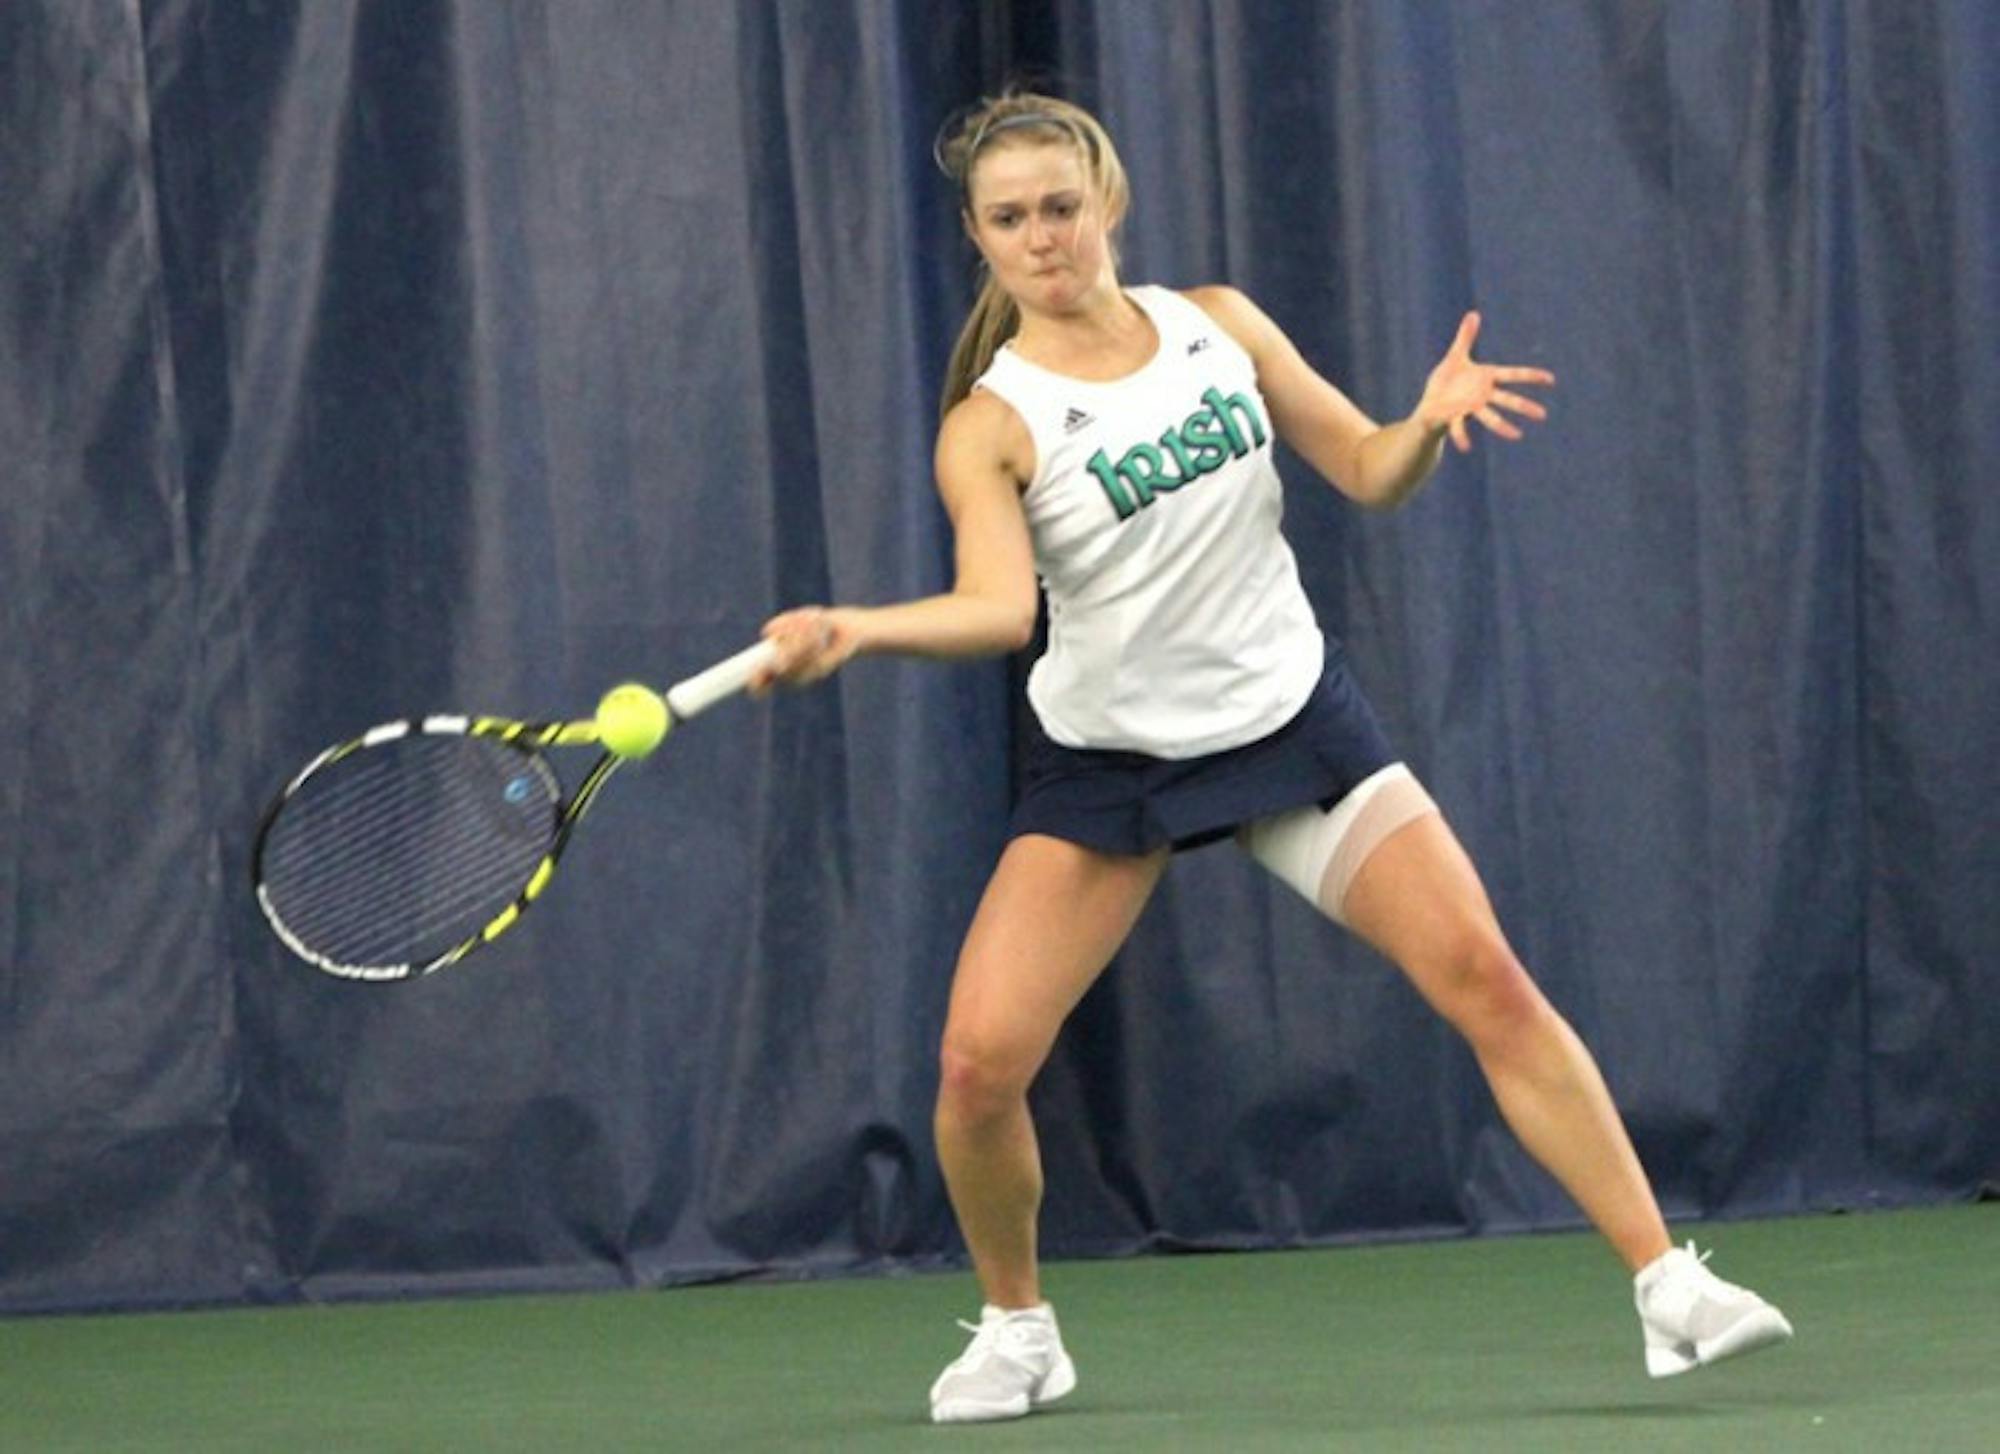 Notre Dame freshman Monica Robinson returns a serve against Indiana on Saturday. Robinson lost in a tie breaker to Indiana senior Sophie Garre, 4-6, 6-3, (10-6).